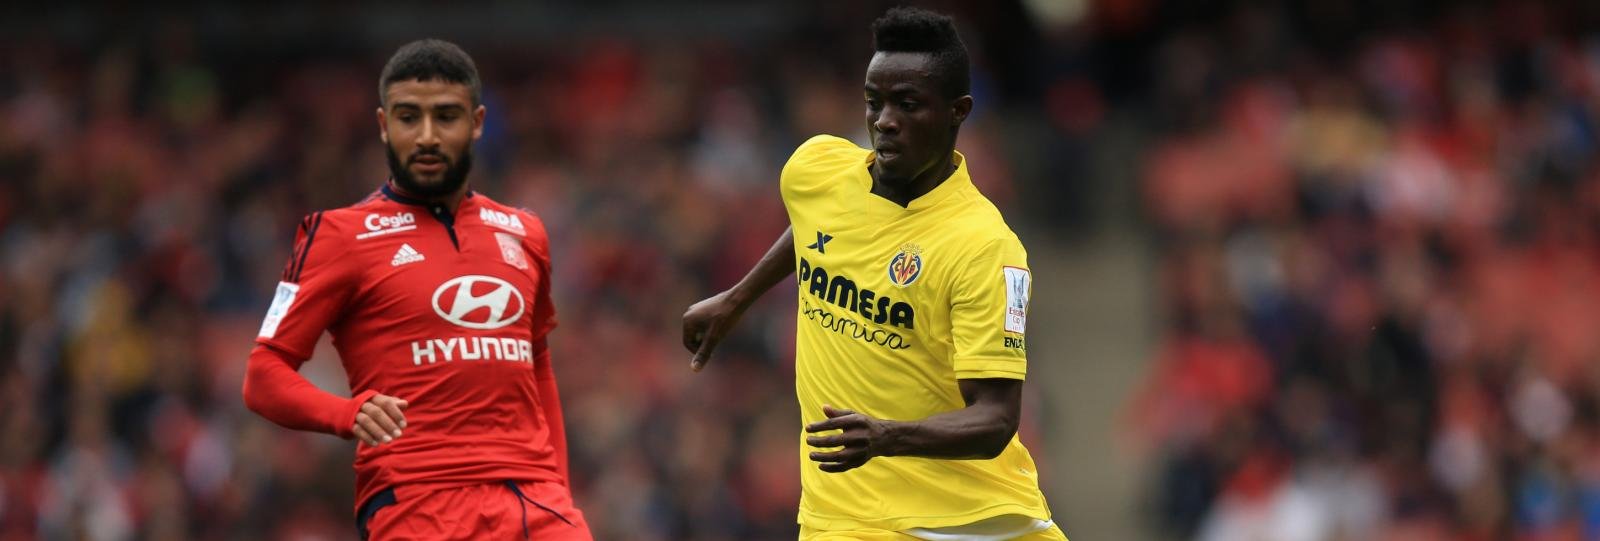 Manchester United complete the £30m signing of Villarreal defender Eric Bailly